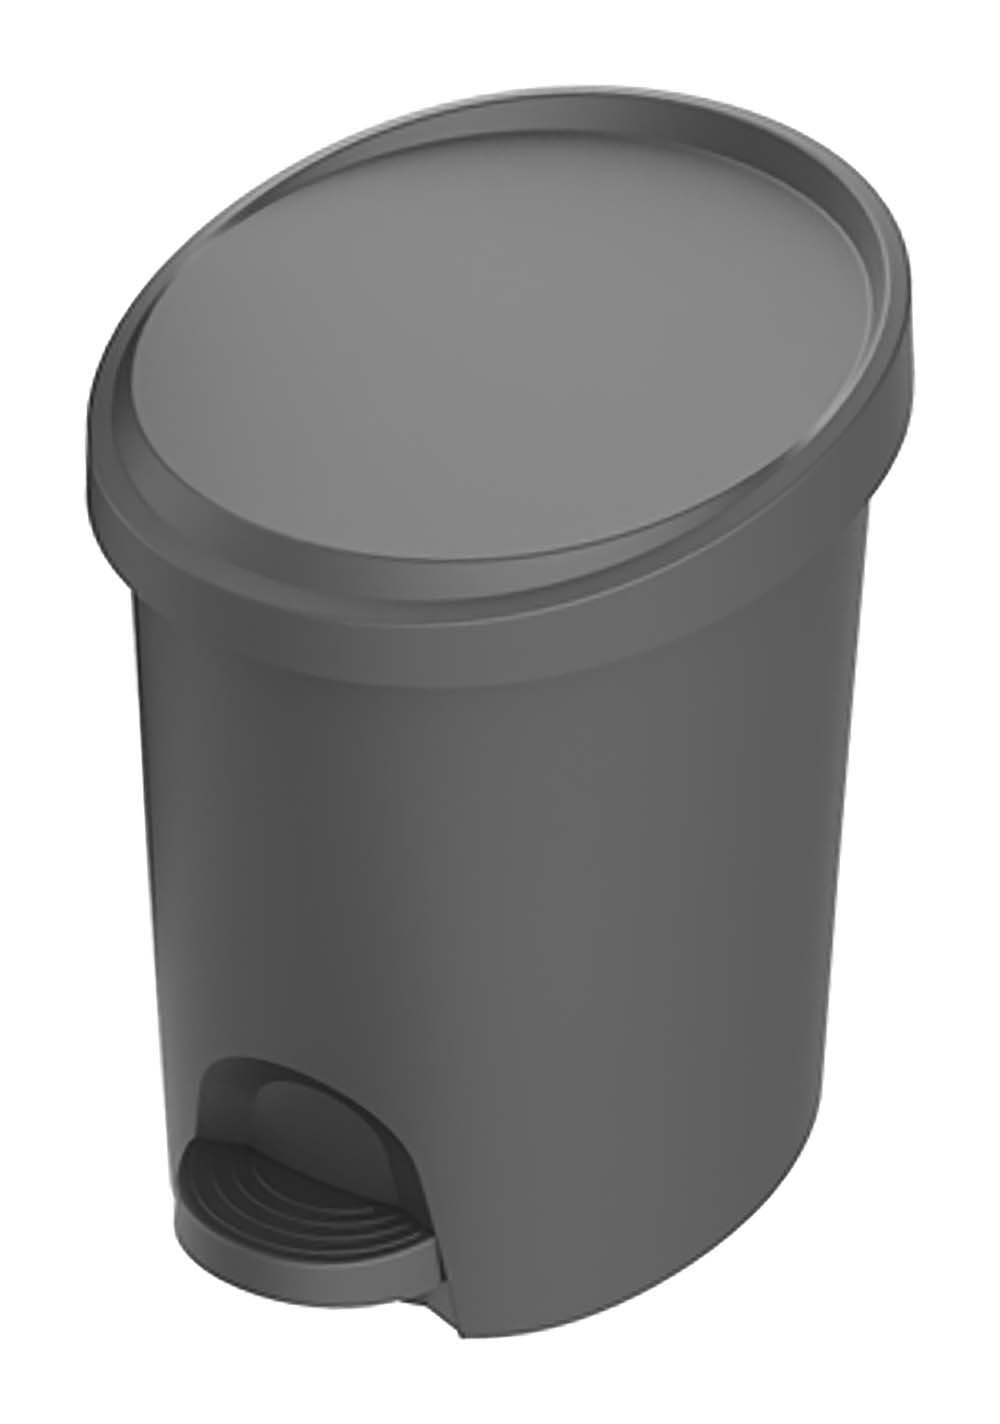 6315228 Made from 100% recycled material. Capacity of 6 liters. With a pedal and an inner bucket.